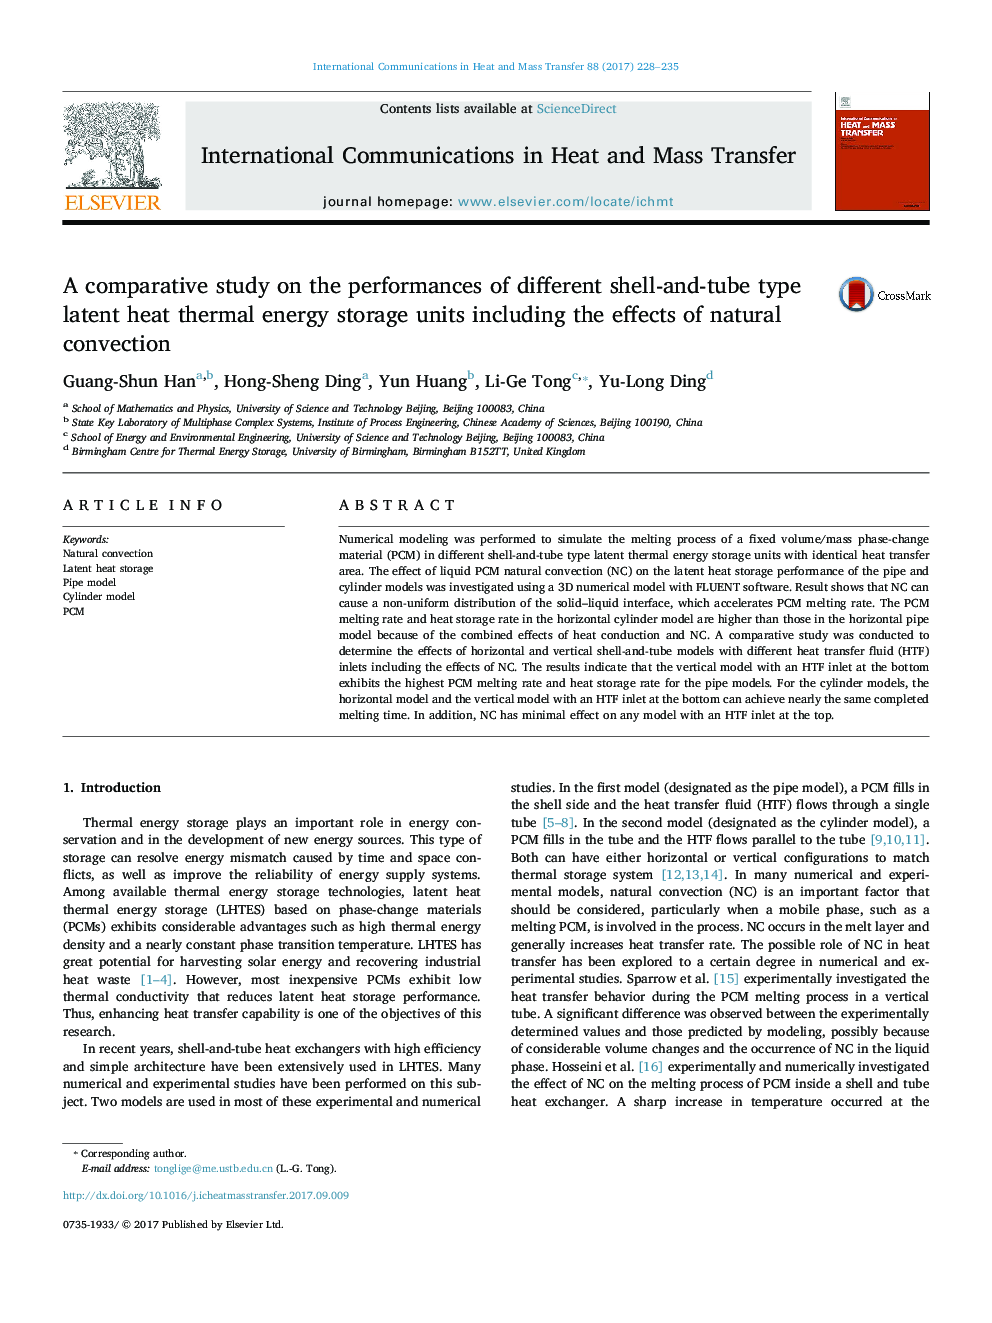 A comparative study on the performances of different shell-and-tube type latent heat thermal energy storage units including the effects of natural convection